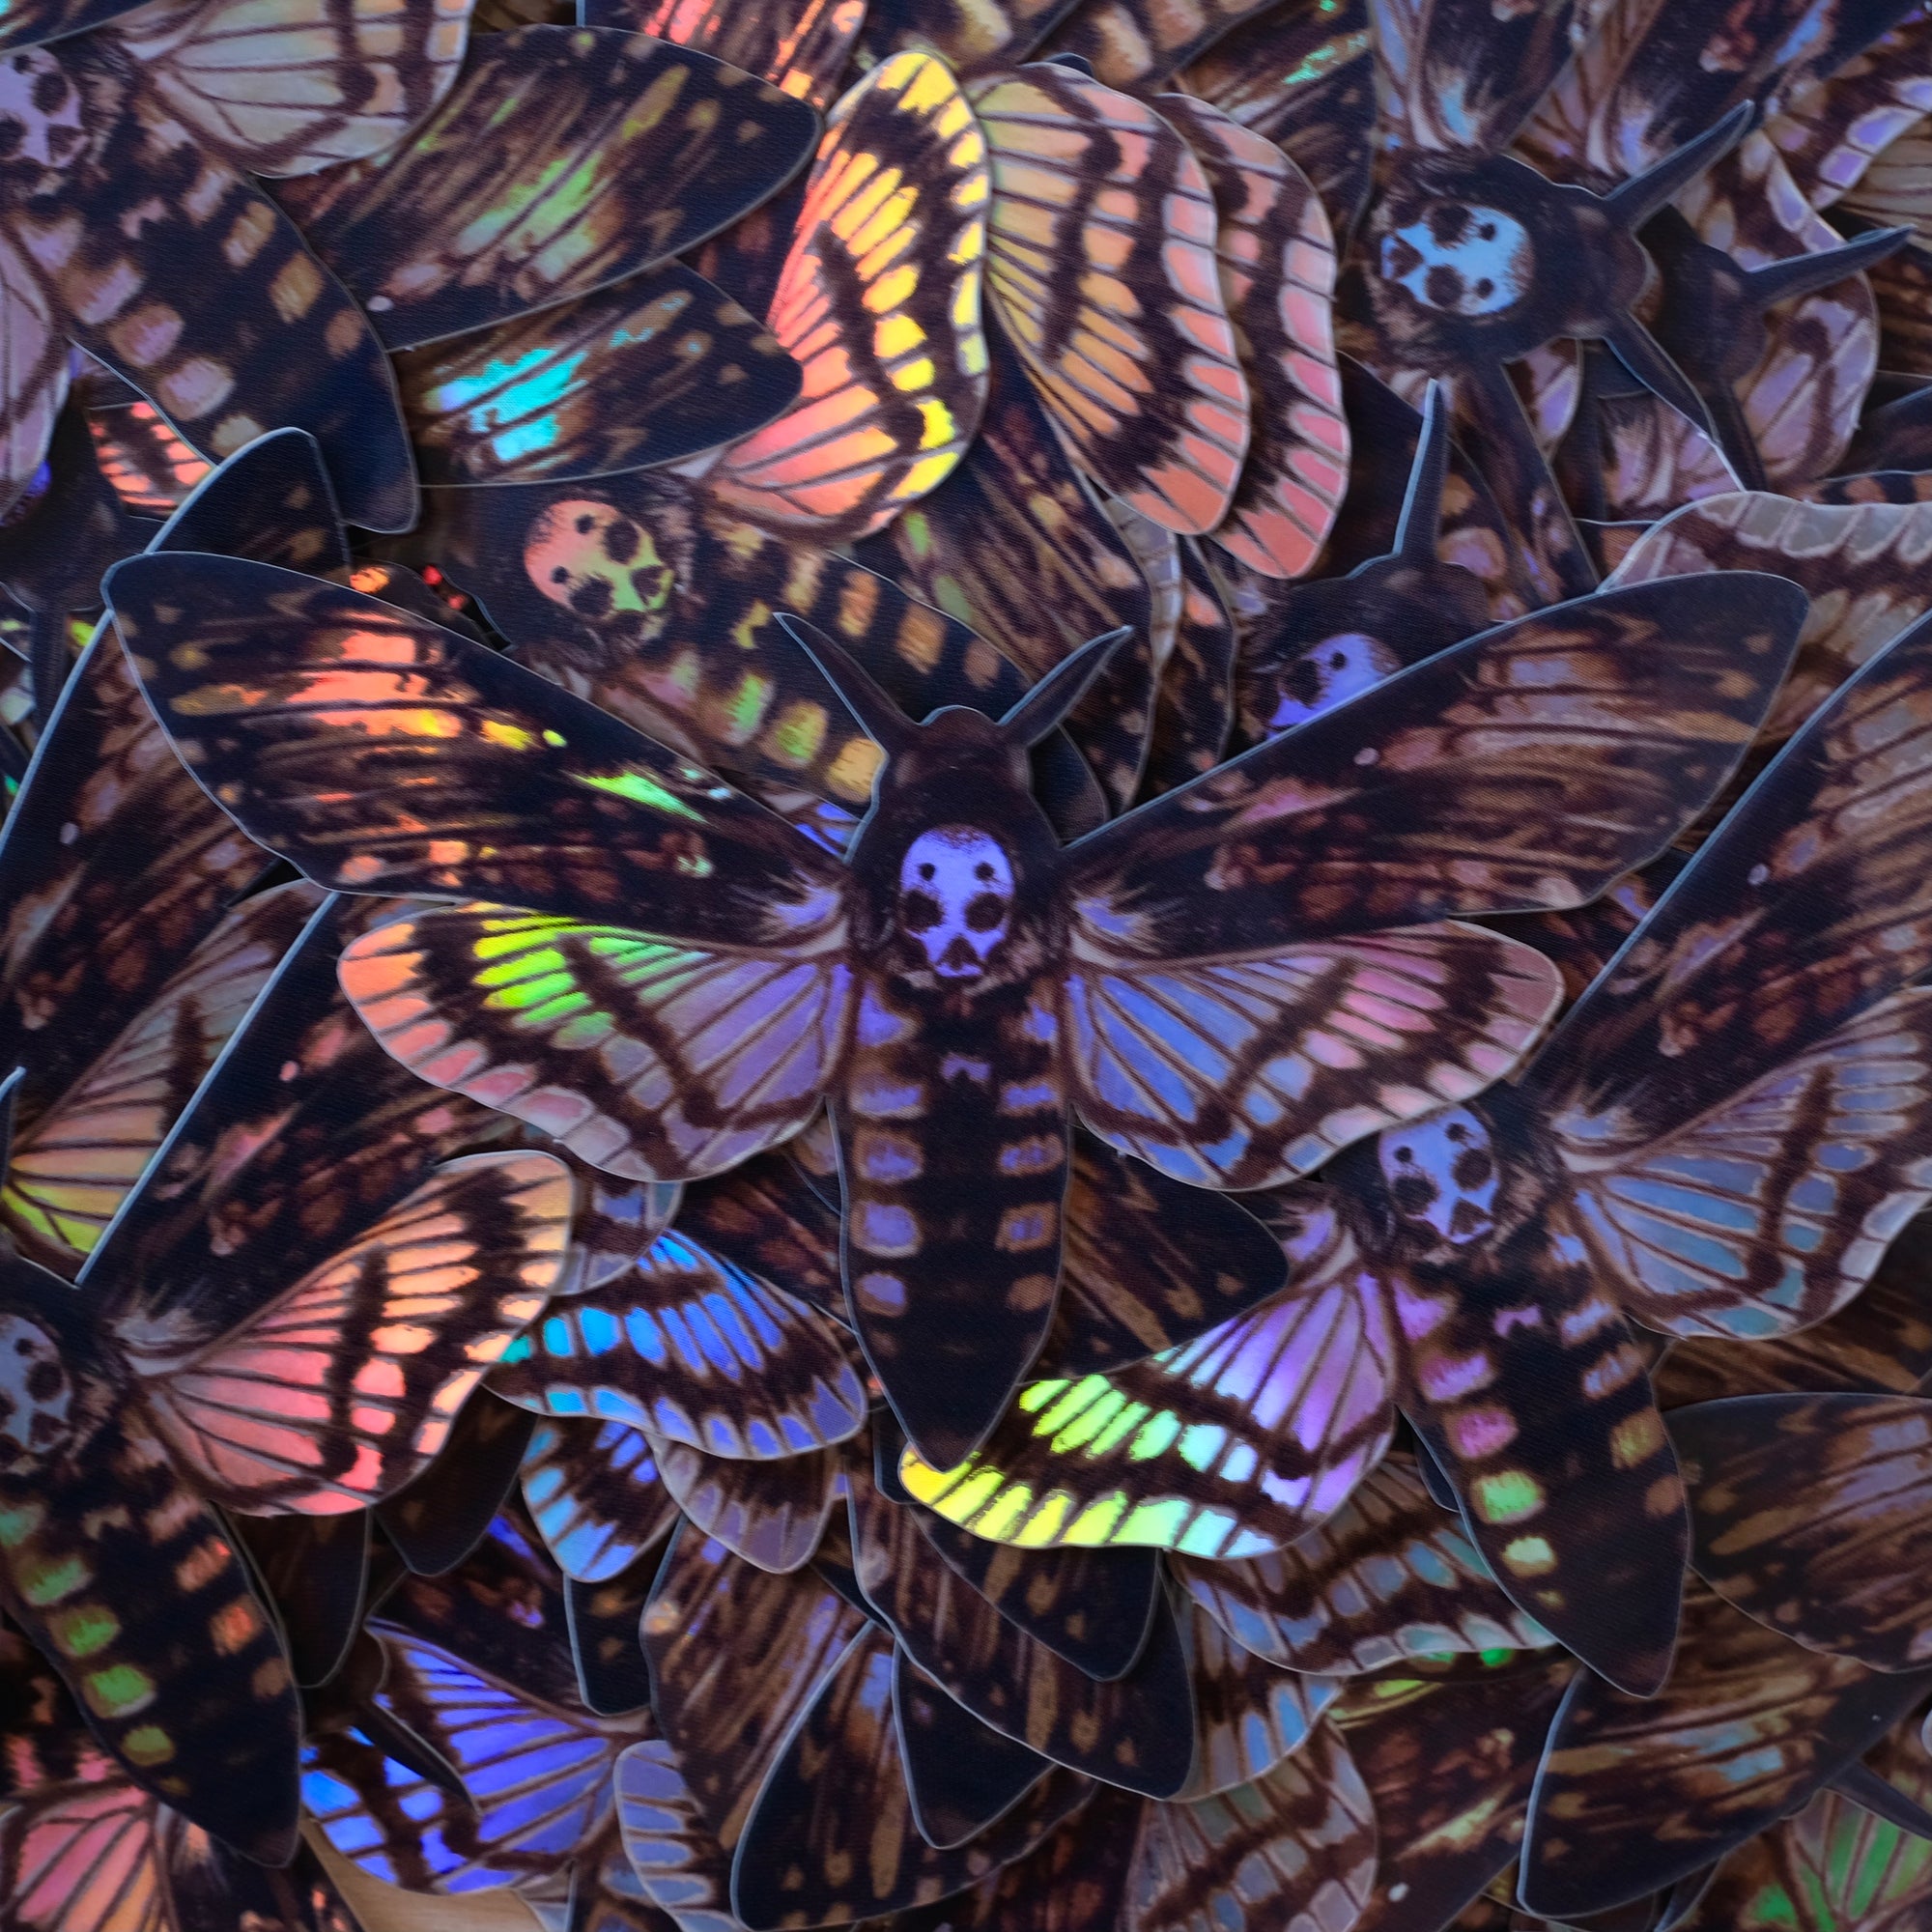 Holographic Death's-Head Moth Stickers